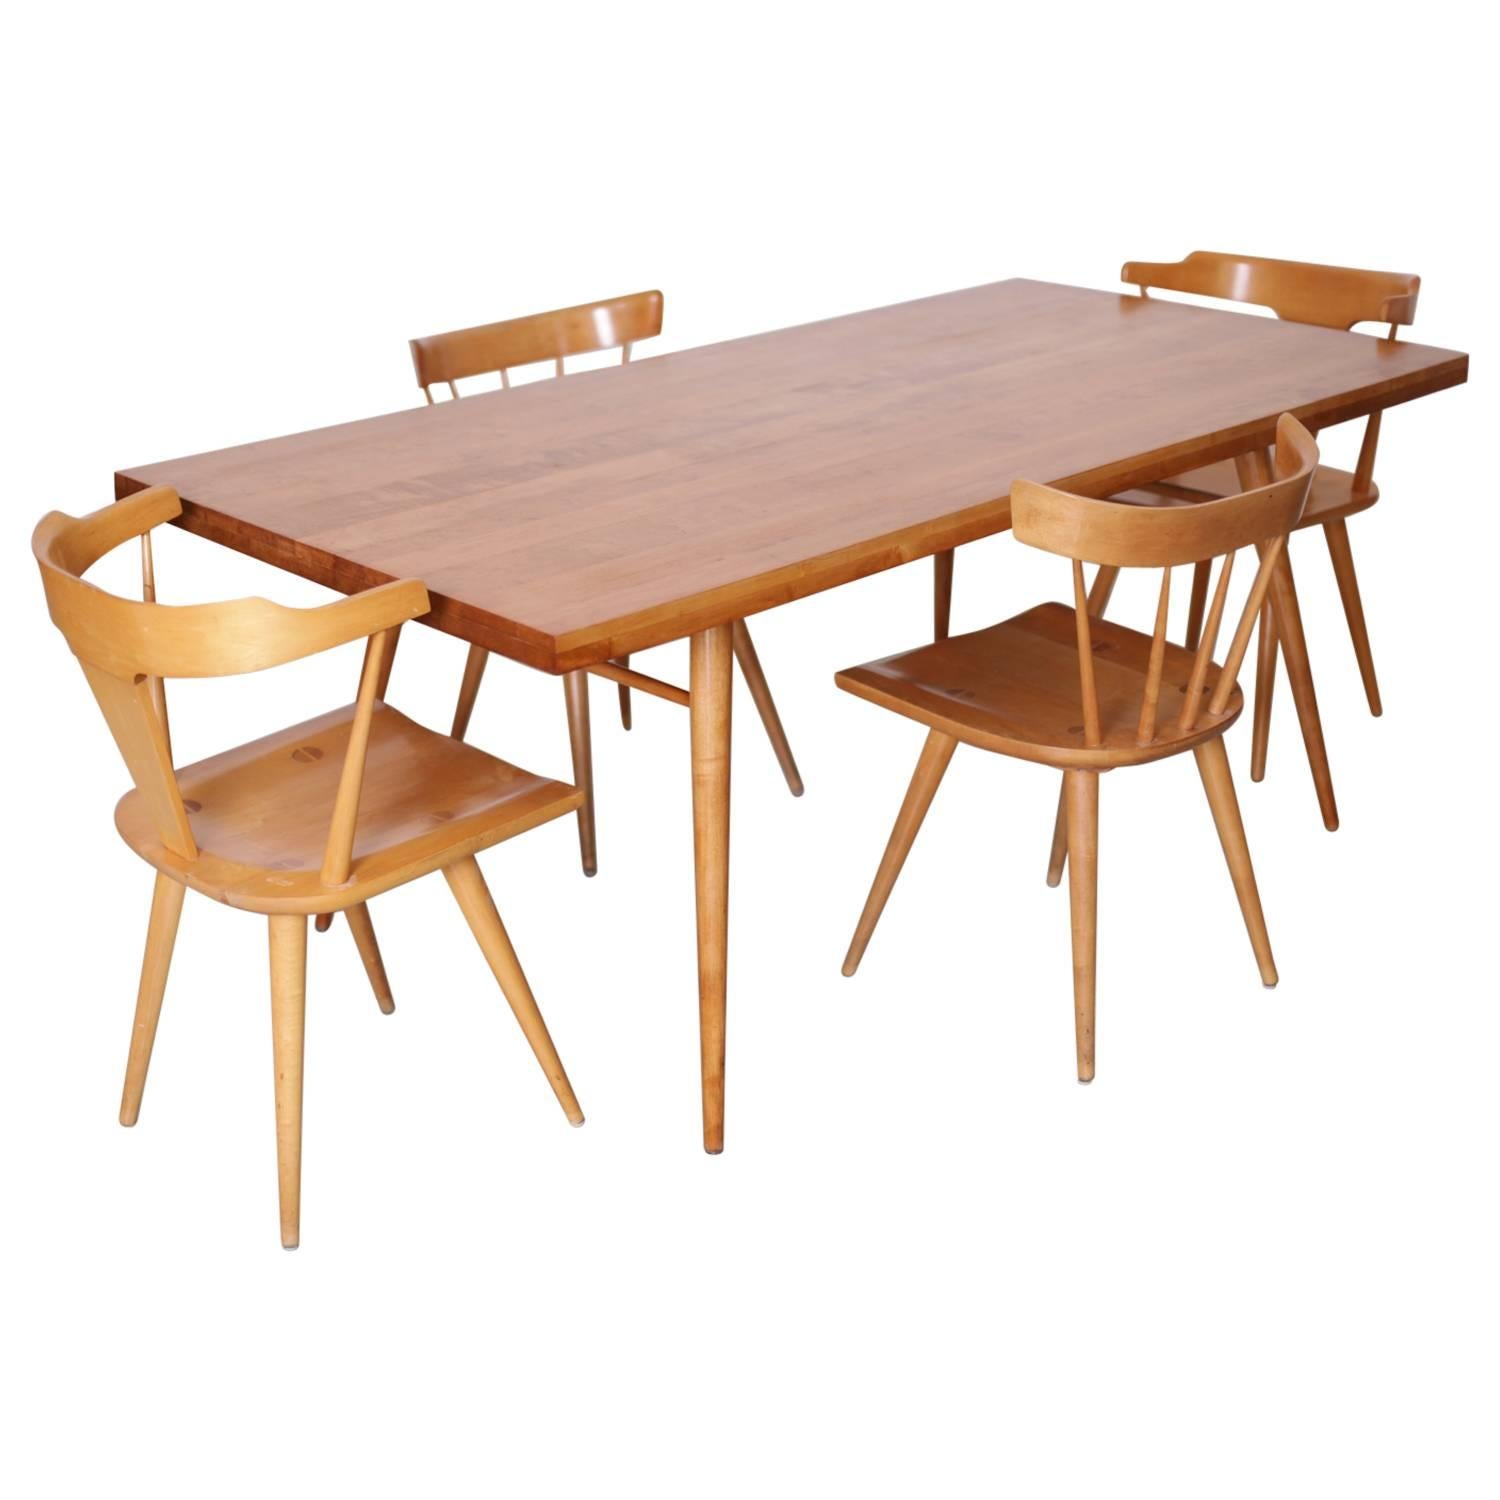 Paul McCobb Dining Set Four Chairs and Table, Maple, 1950s, Winchendon